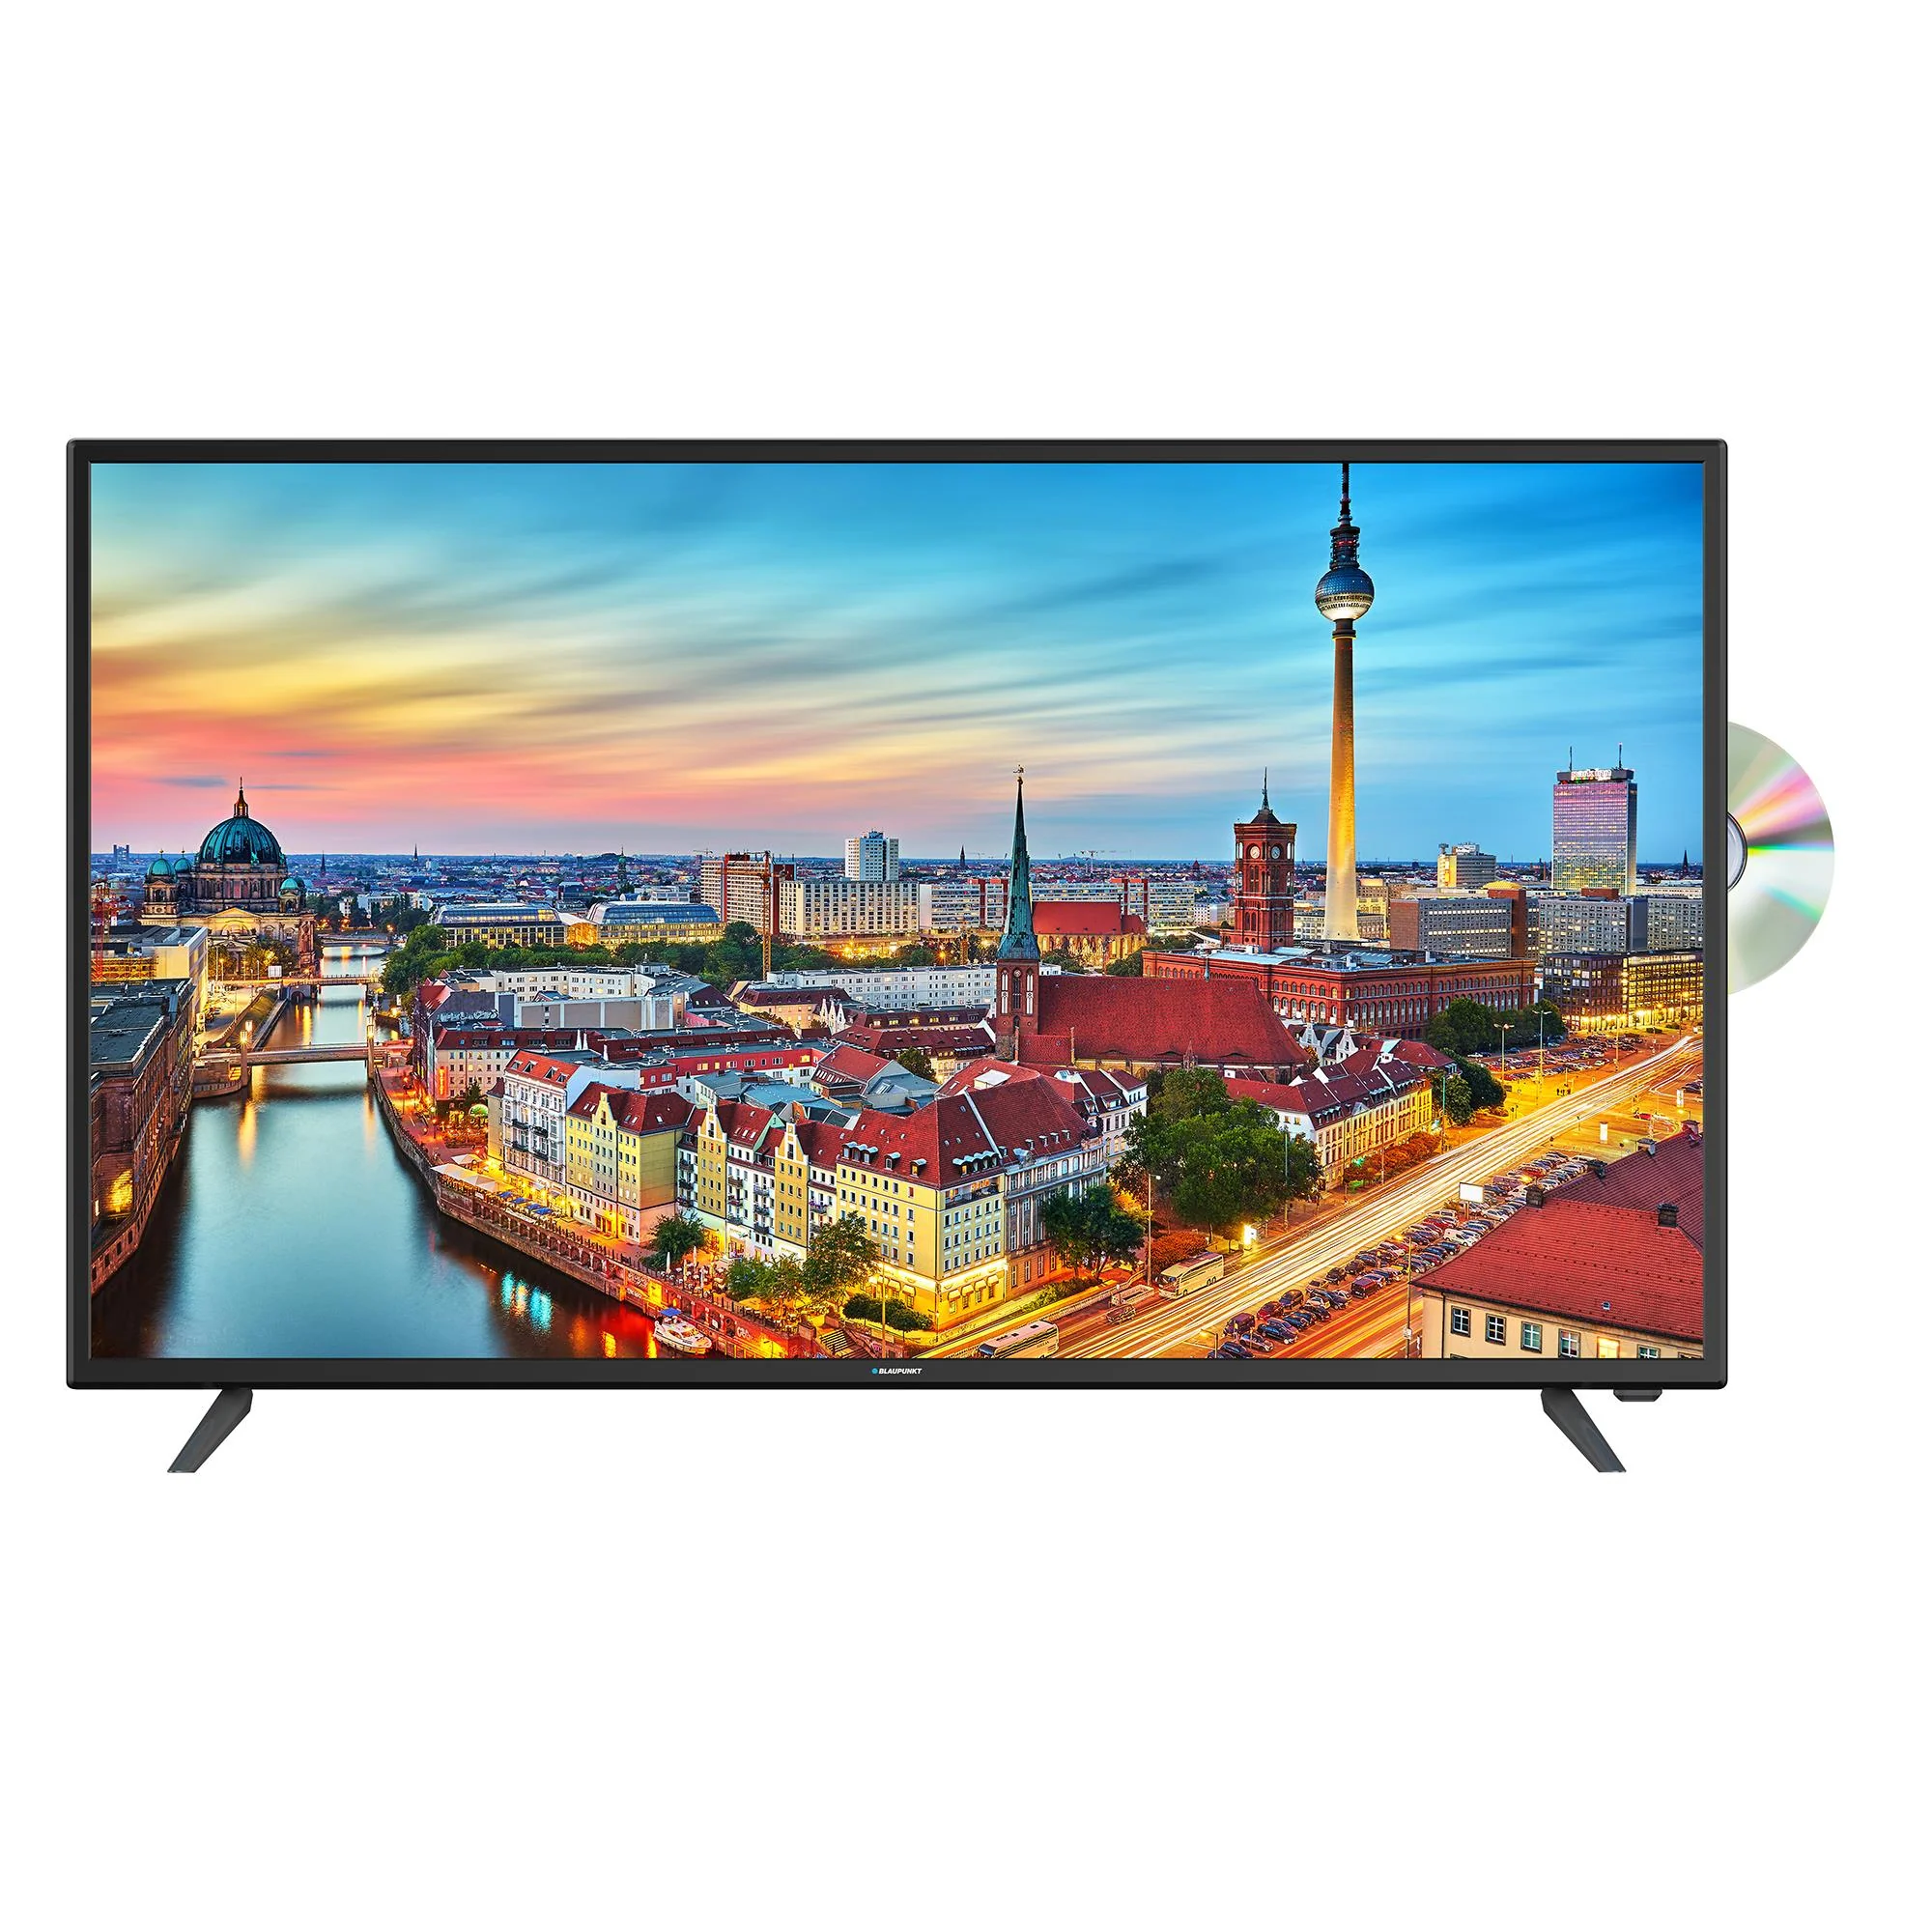 Blaupunkt 40" Full HD TV With Built-in DVD Player